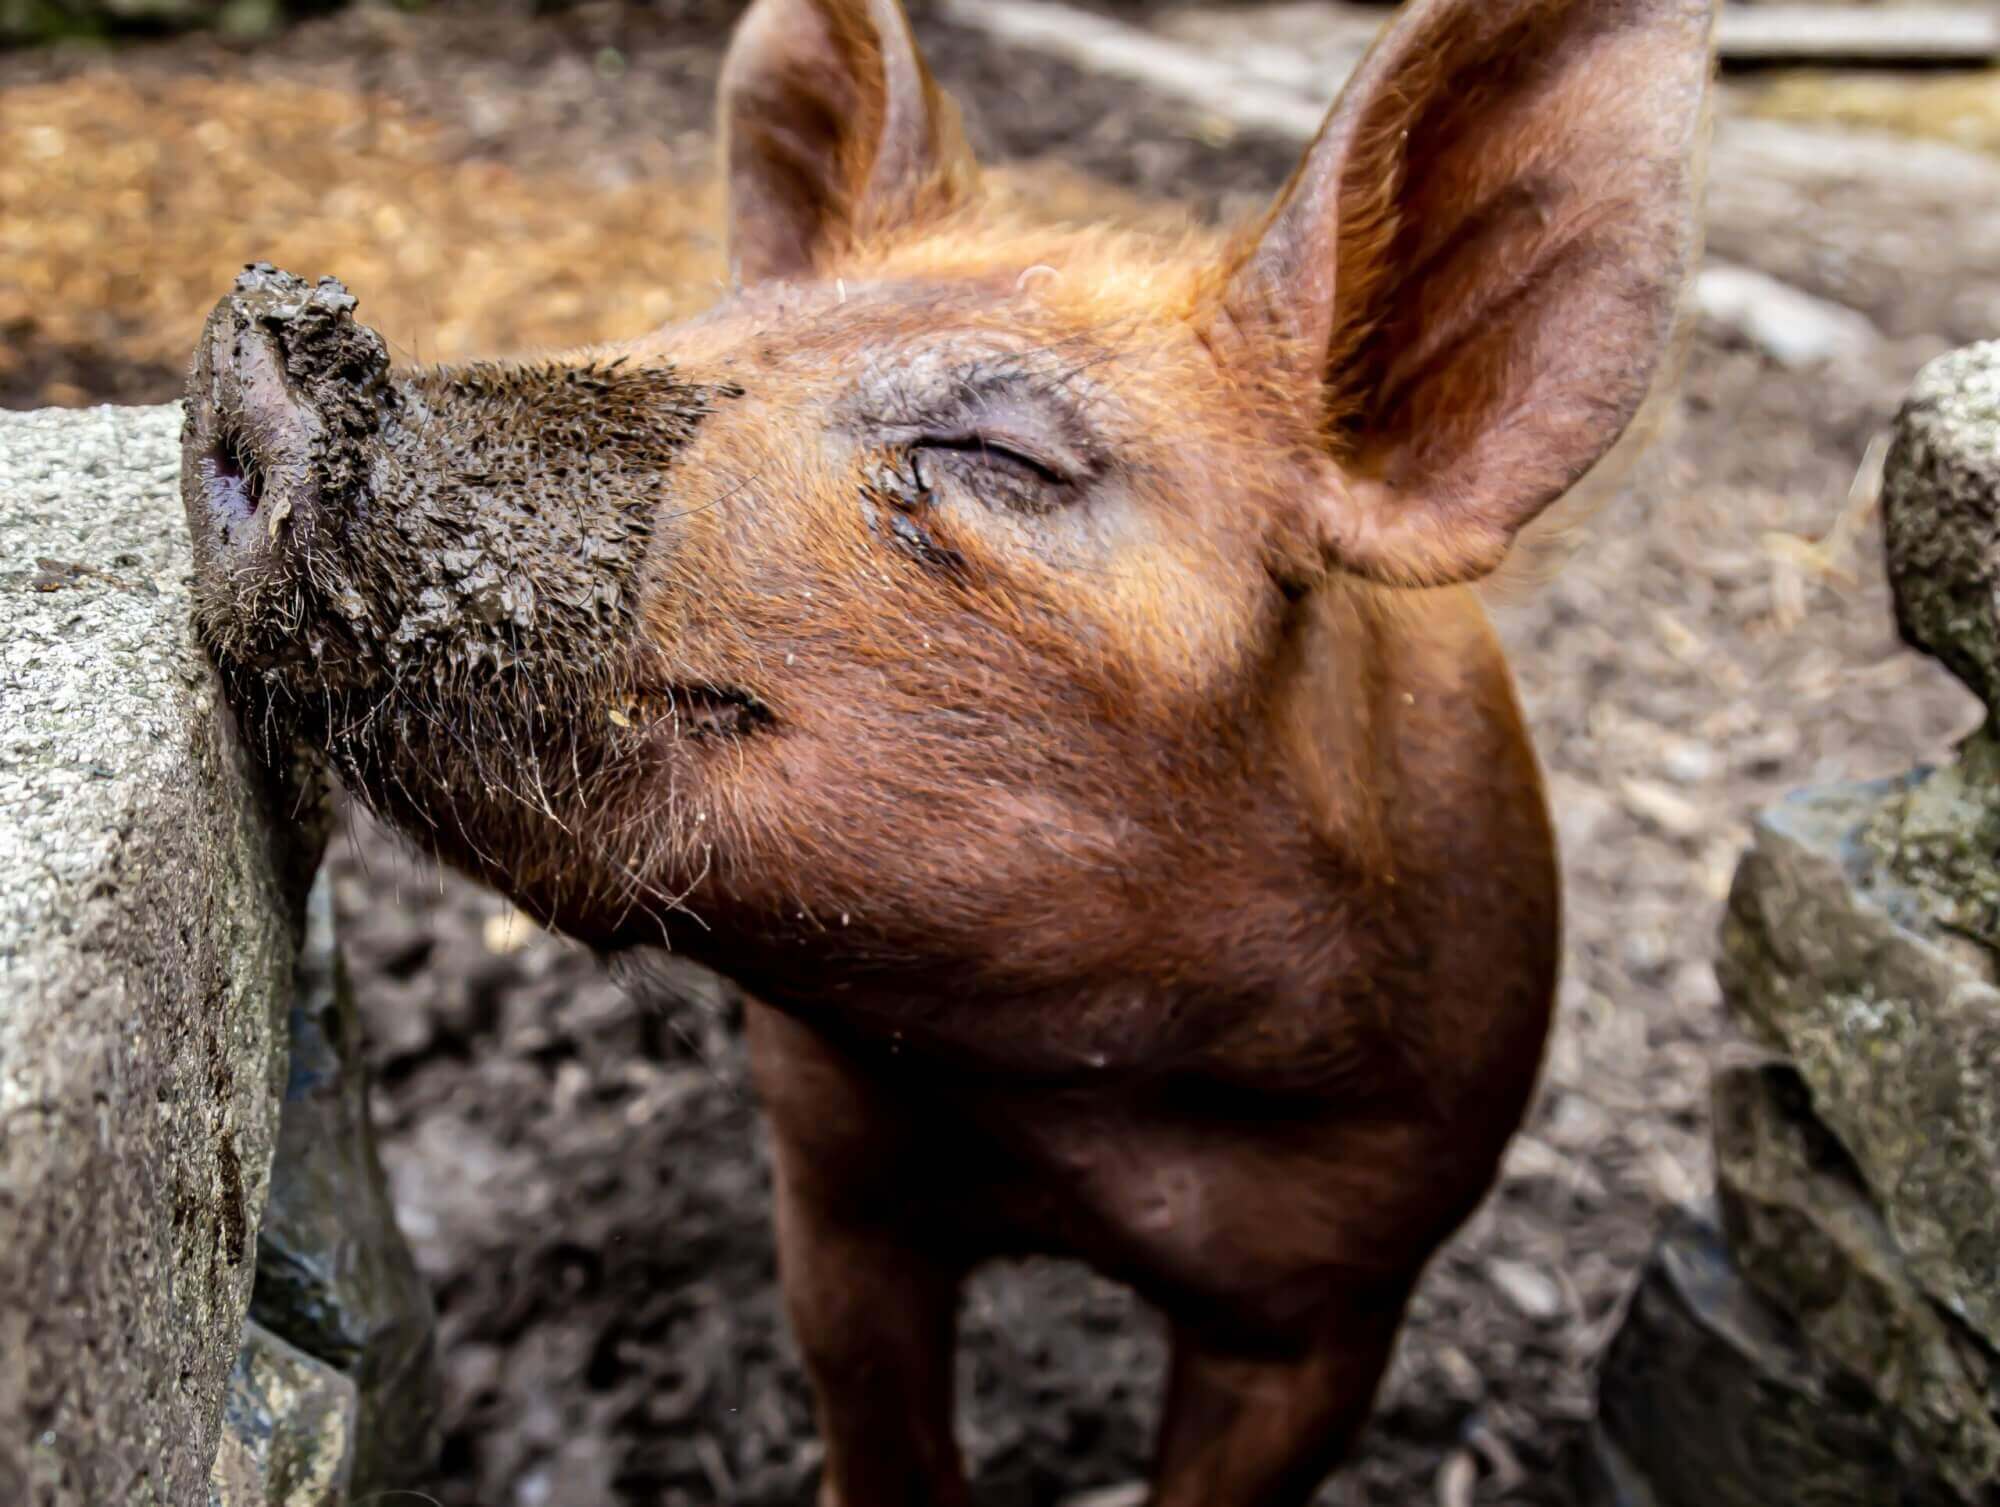 Image from Unsplash of a happy pig